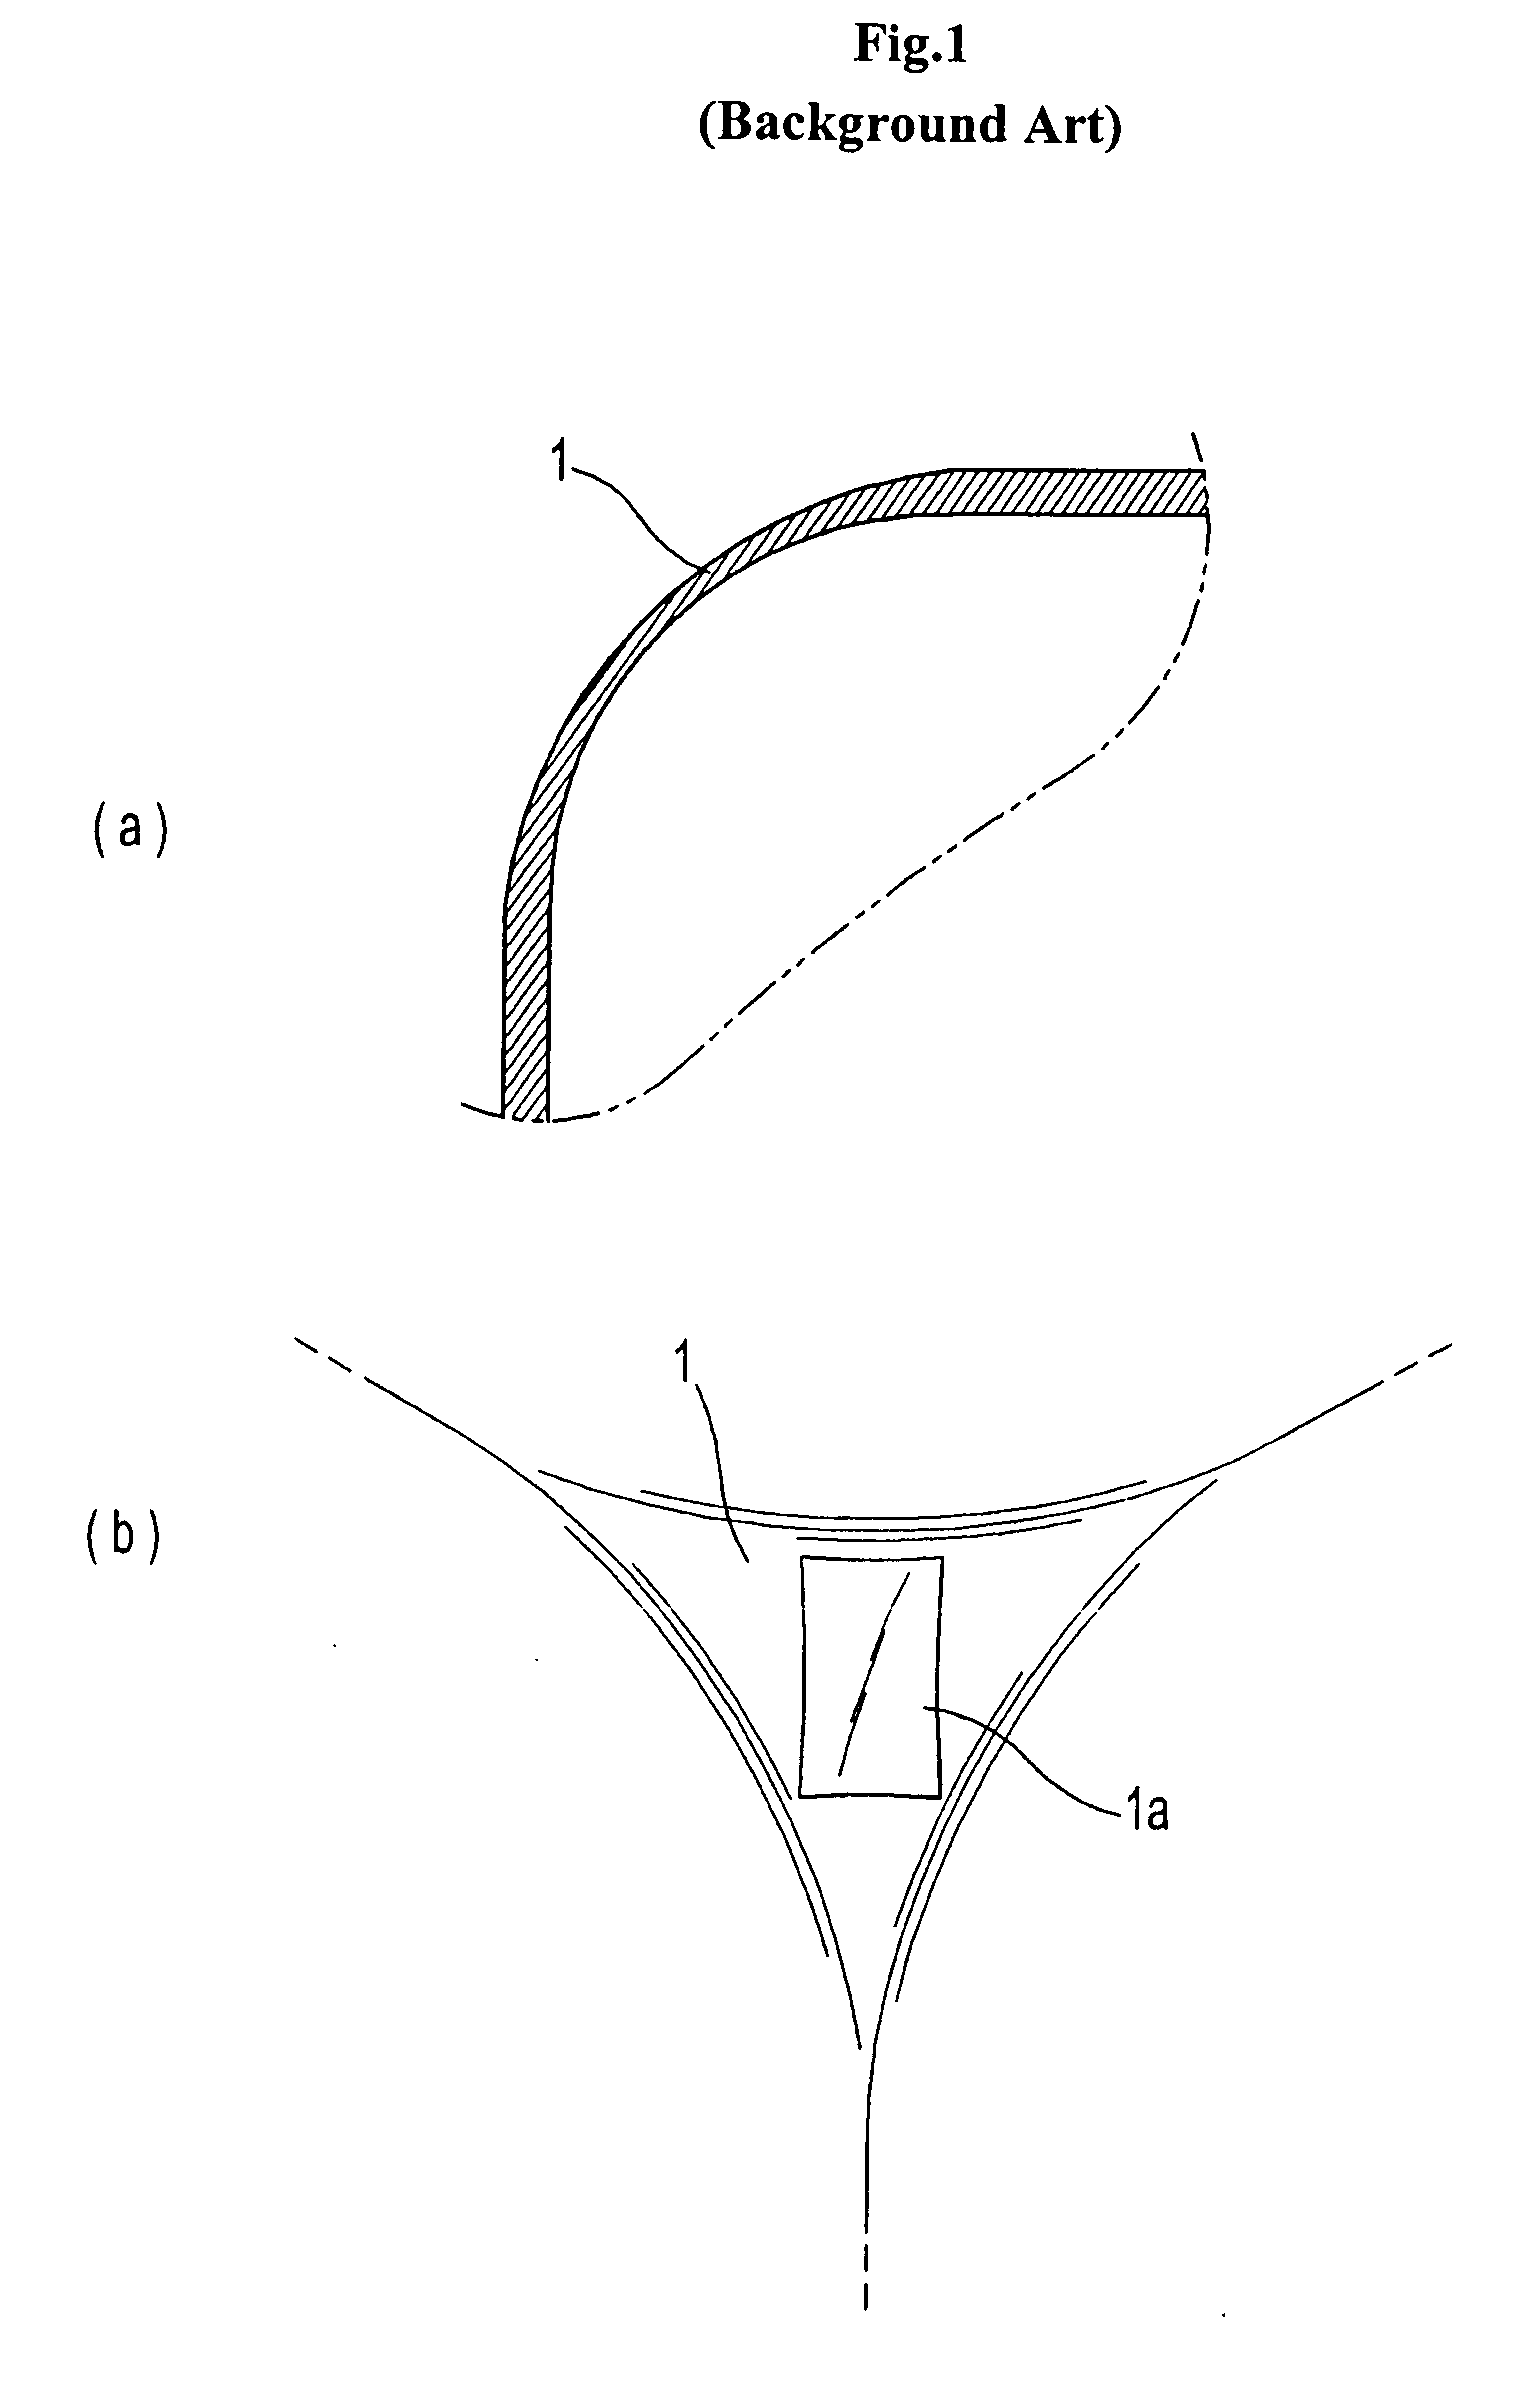 Inner liner of refrigerator and mold for forming the same